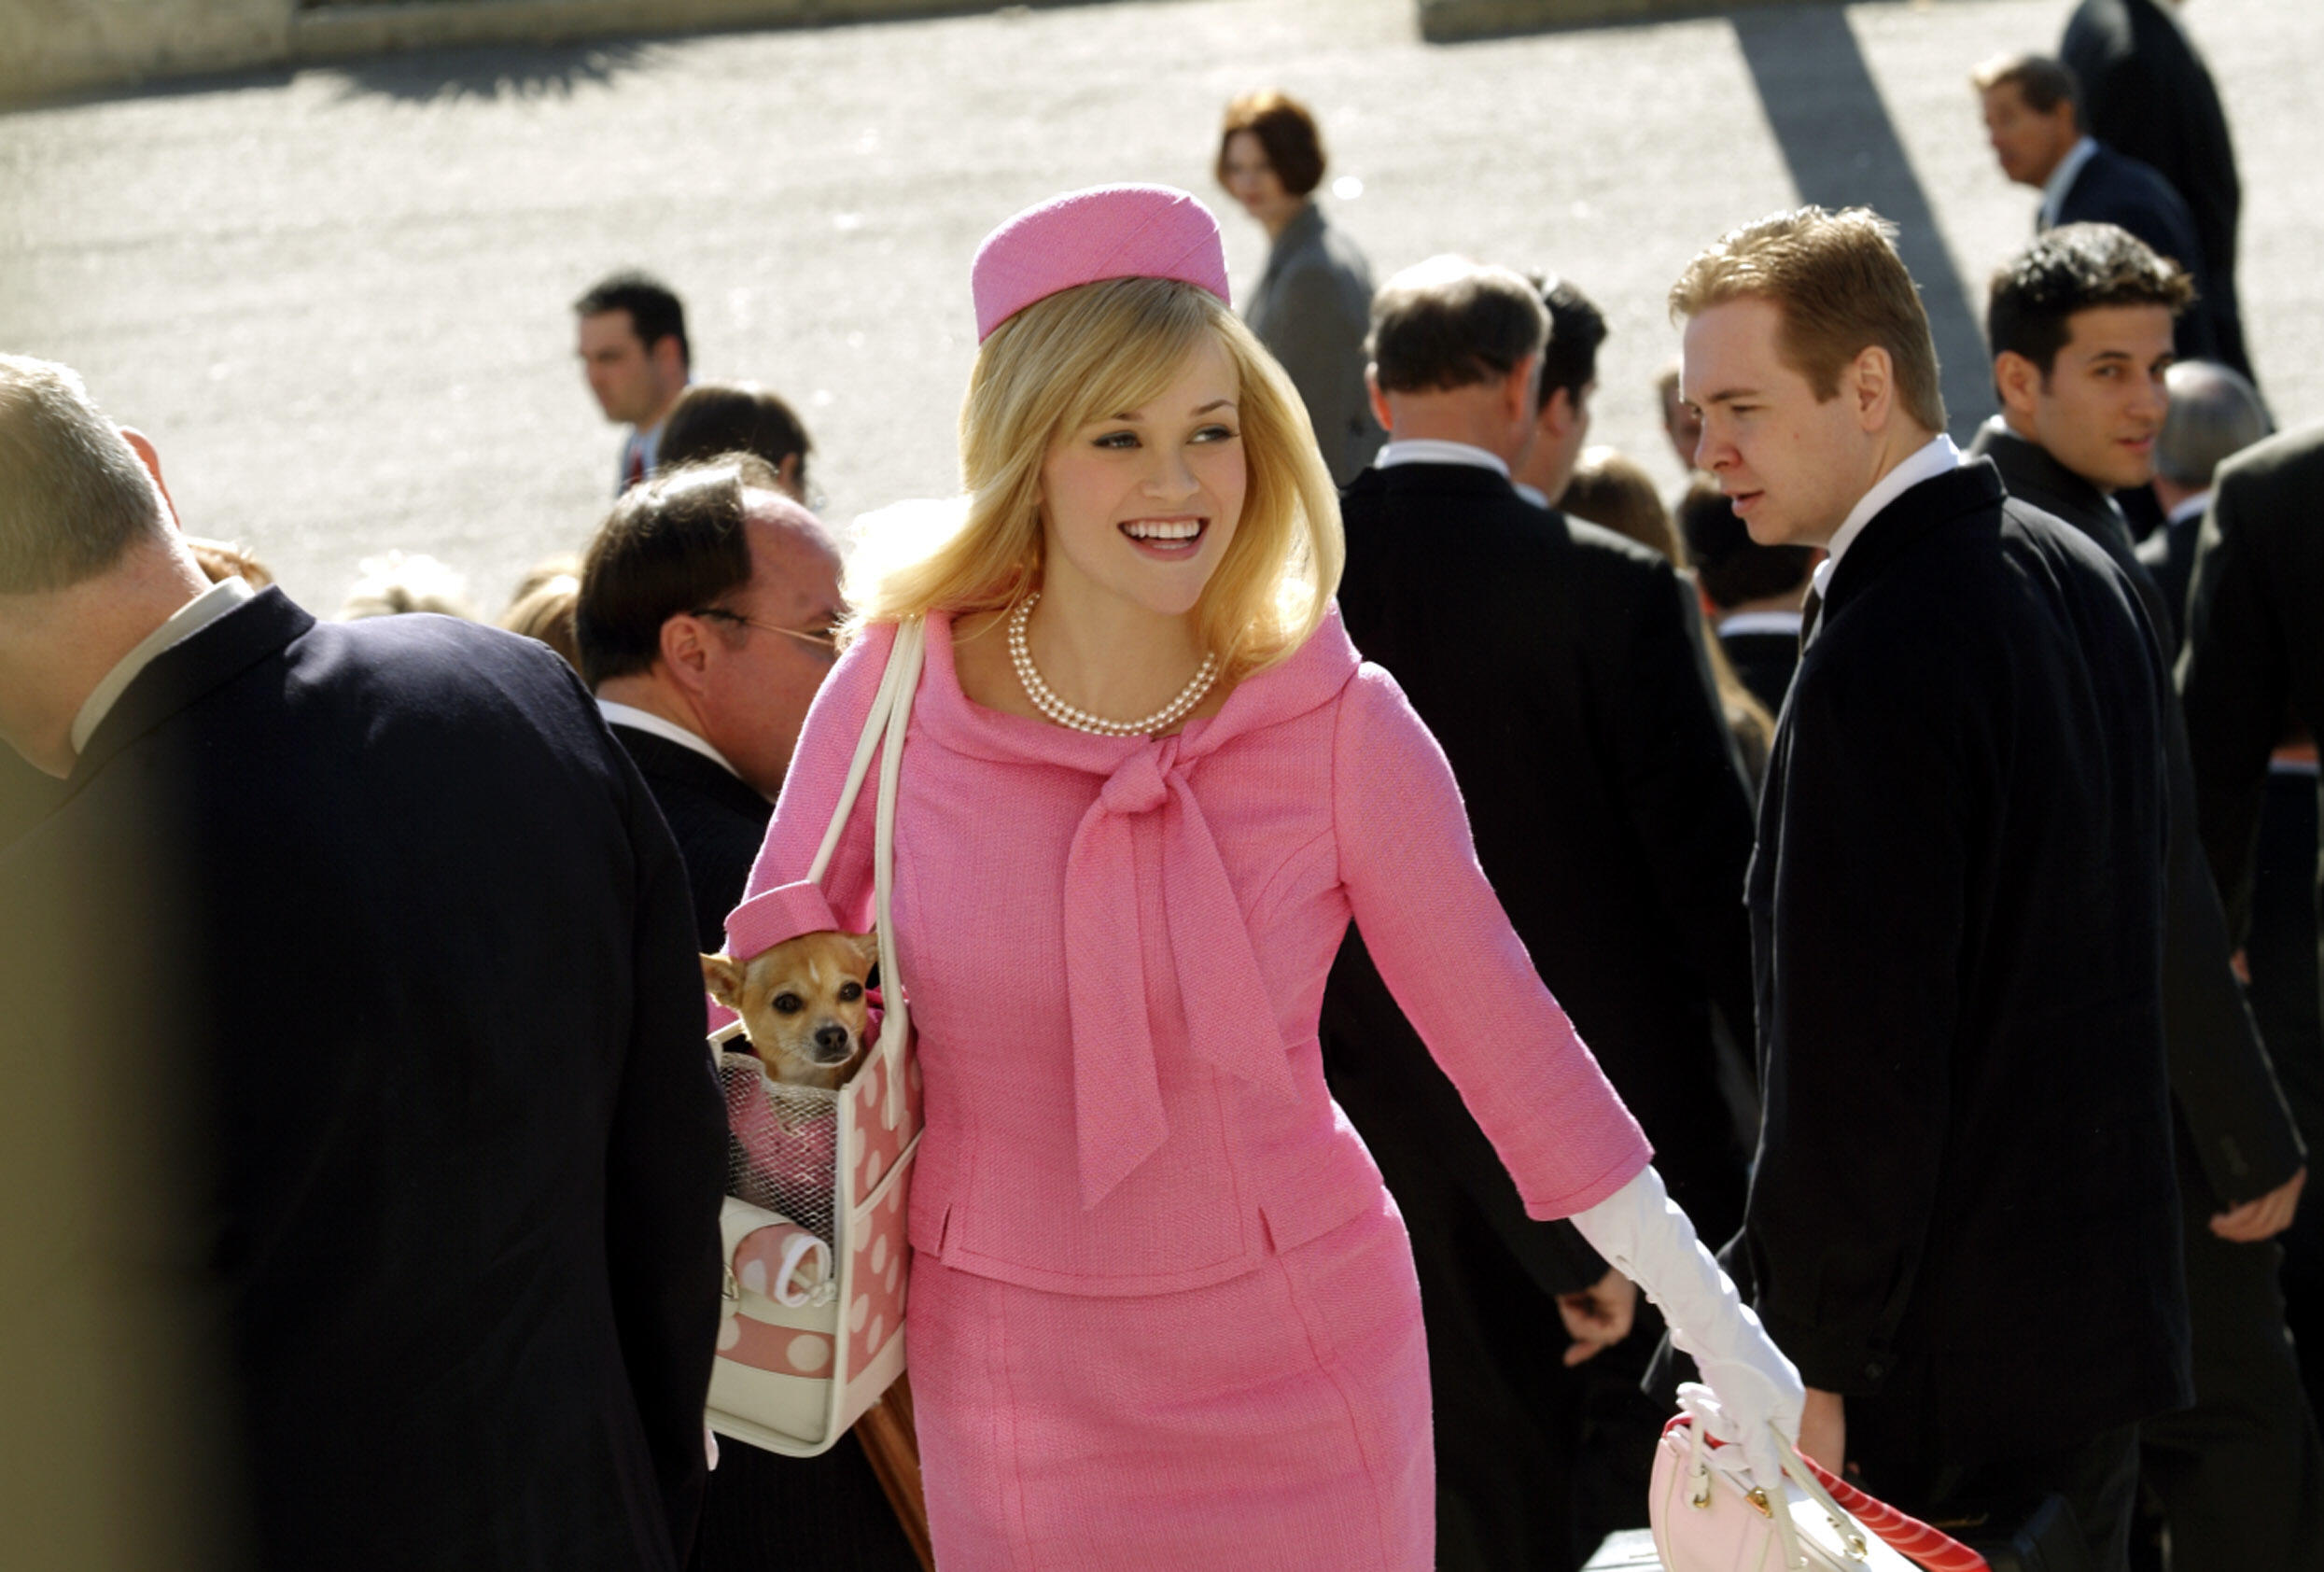 Legally Blonde went on to have two movie sequels, one released in 2003 and another in 2009